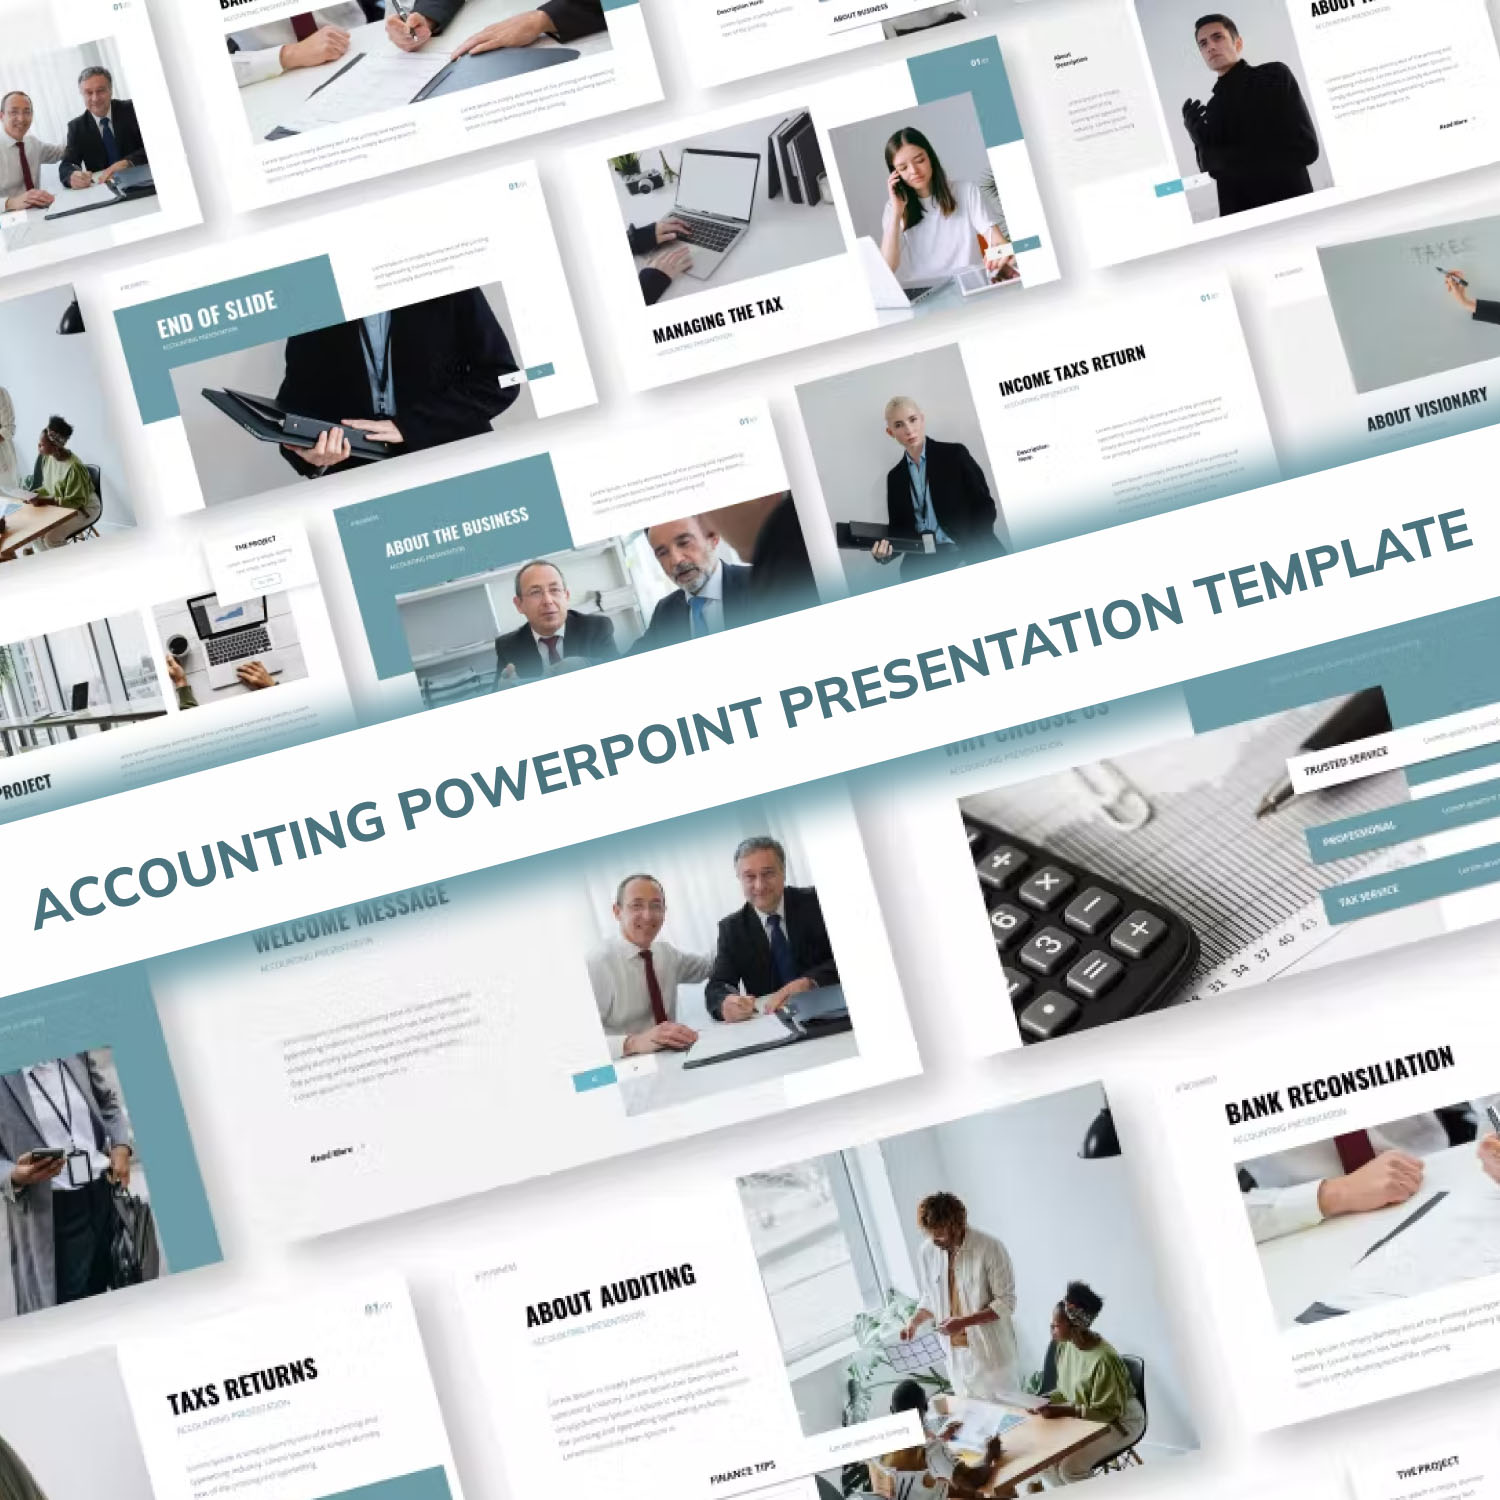 Preview accounting powerpoint presentation template.